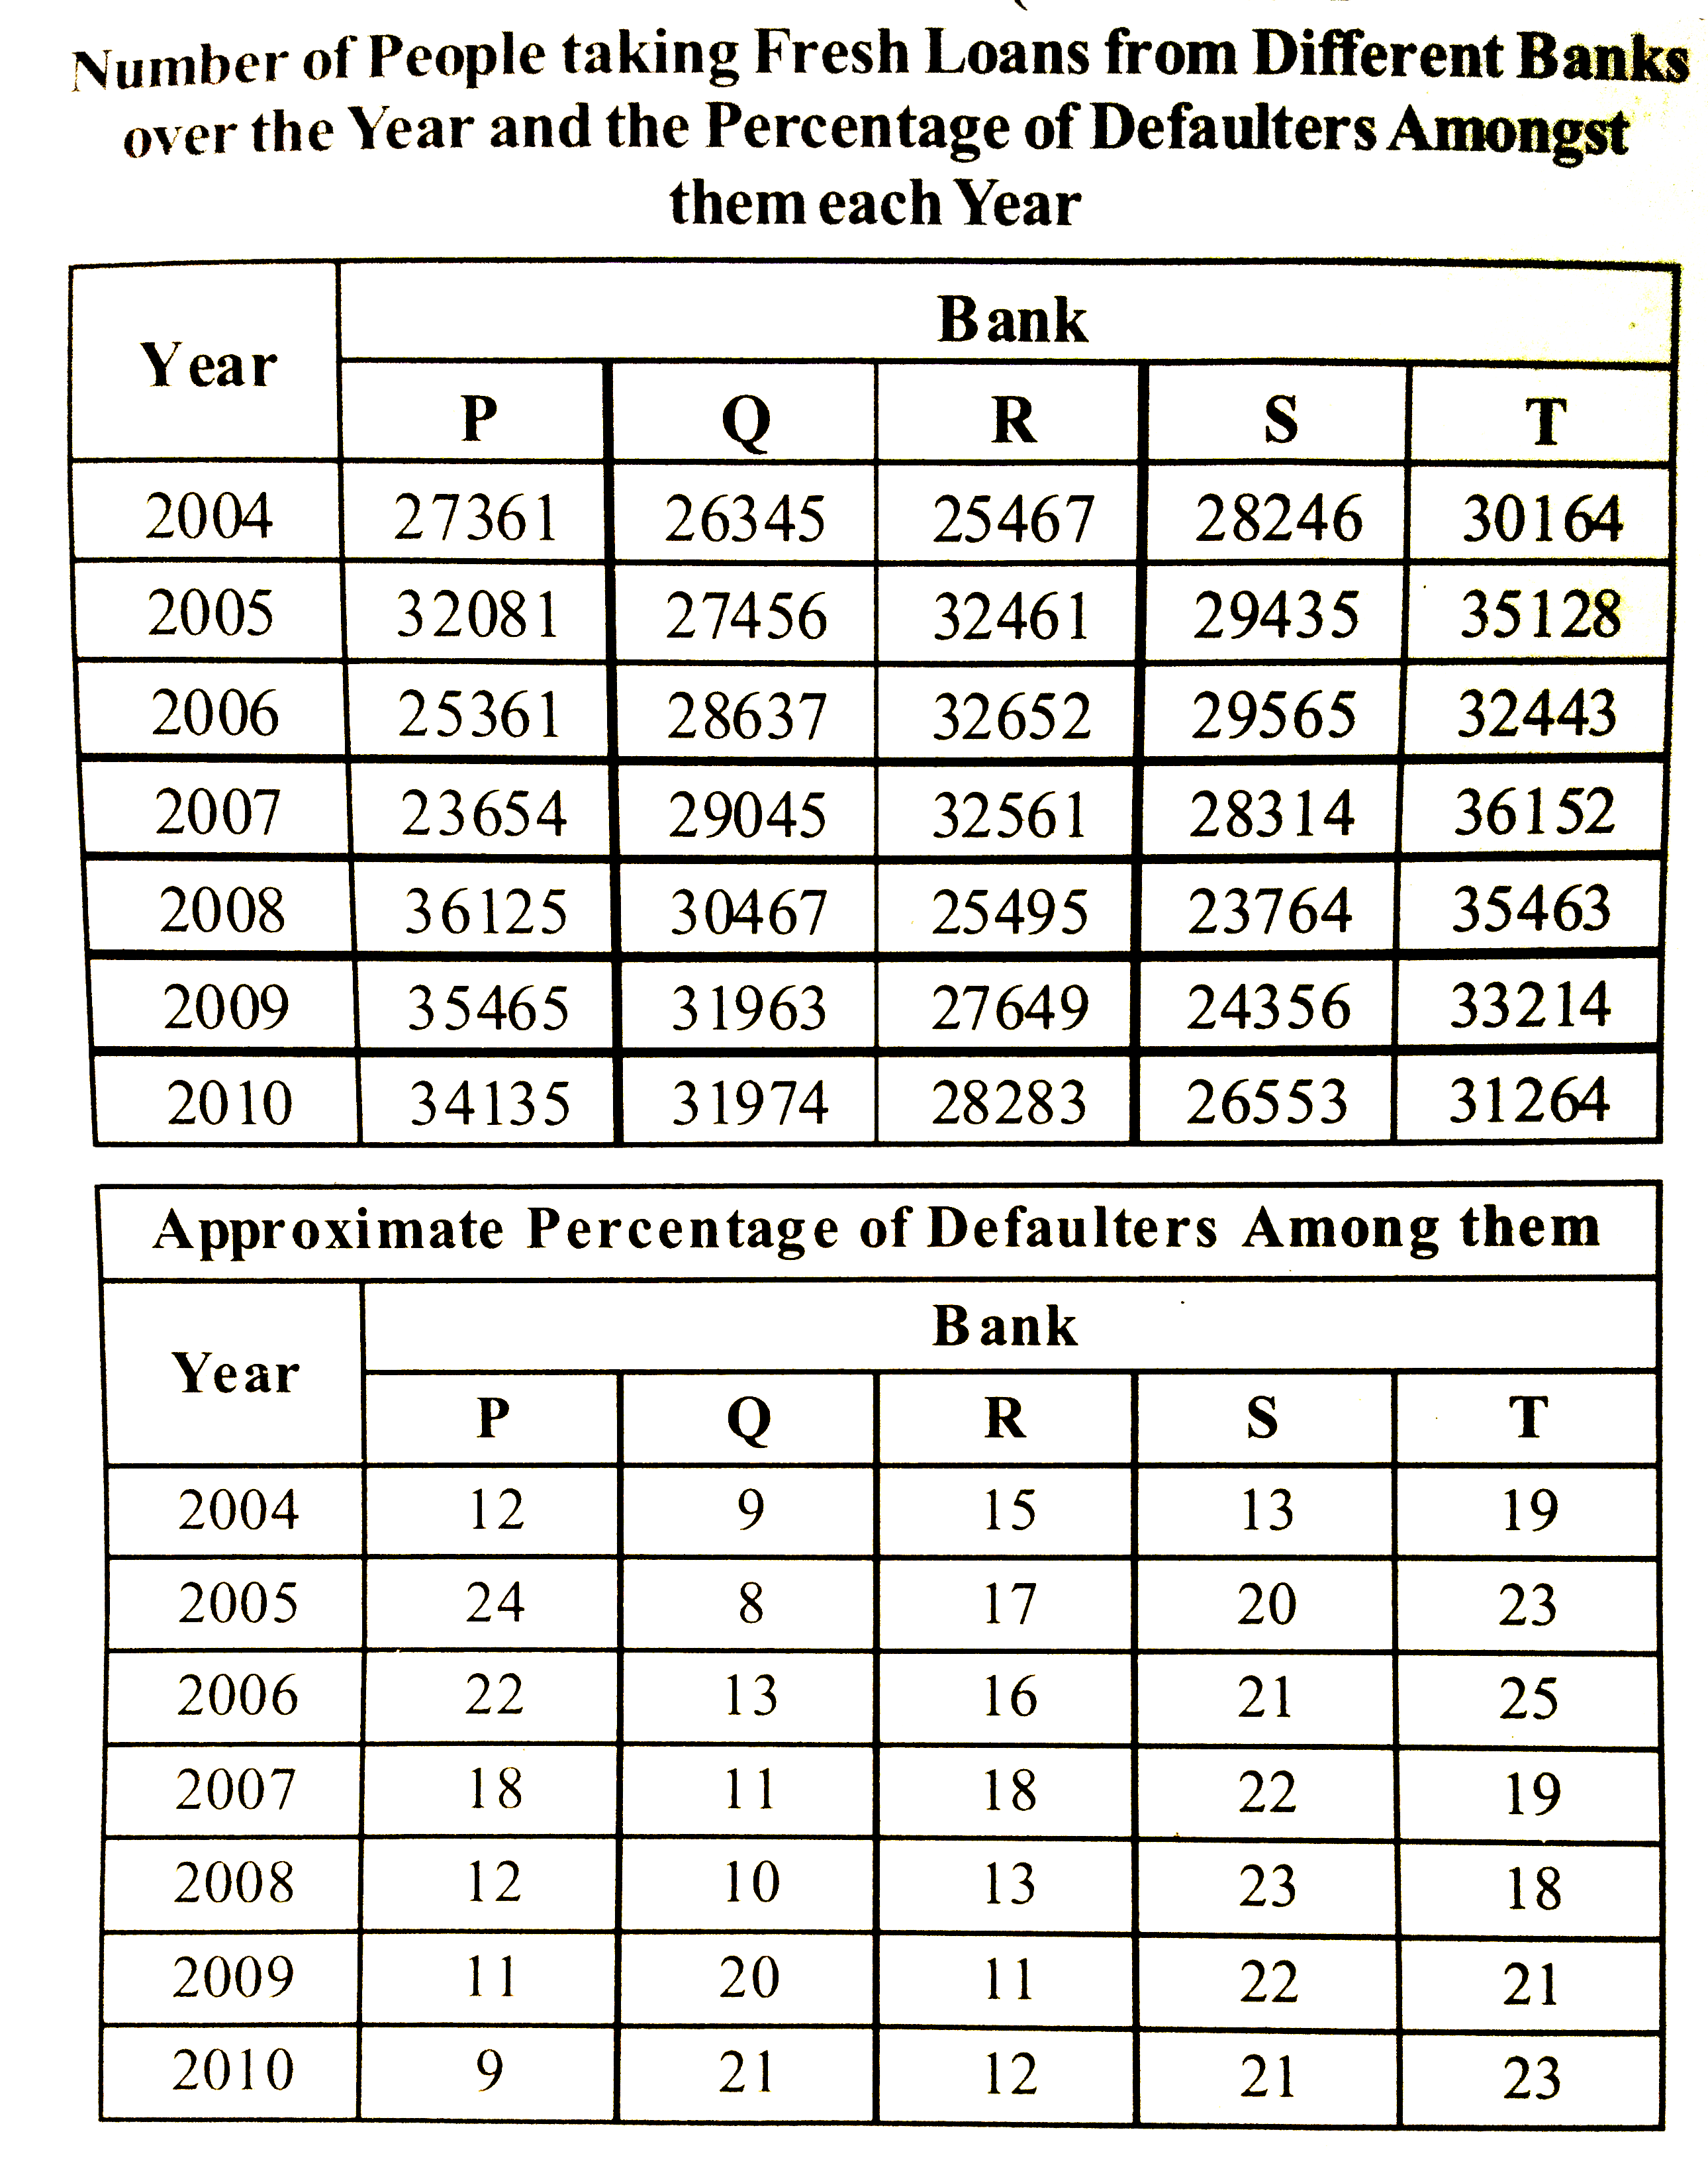 In which of the following years was the numbr of defaulters of Bank R, the maximum among the given years ?